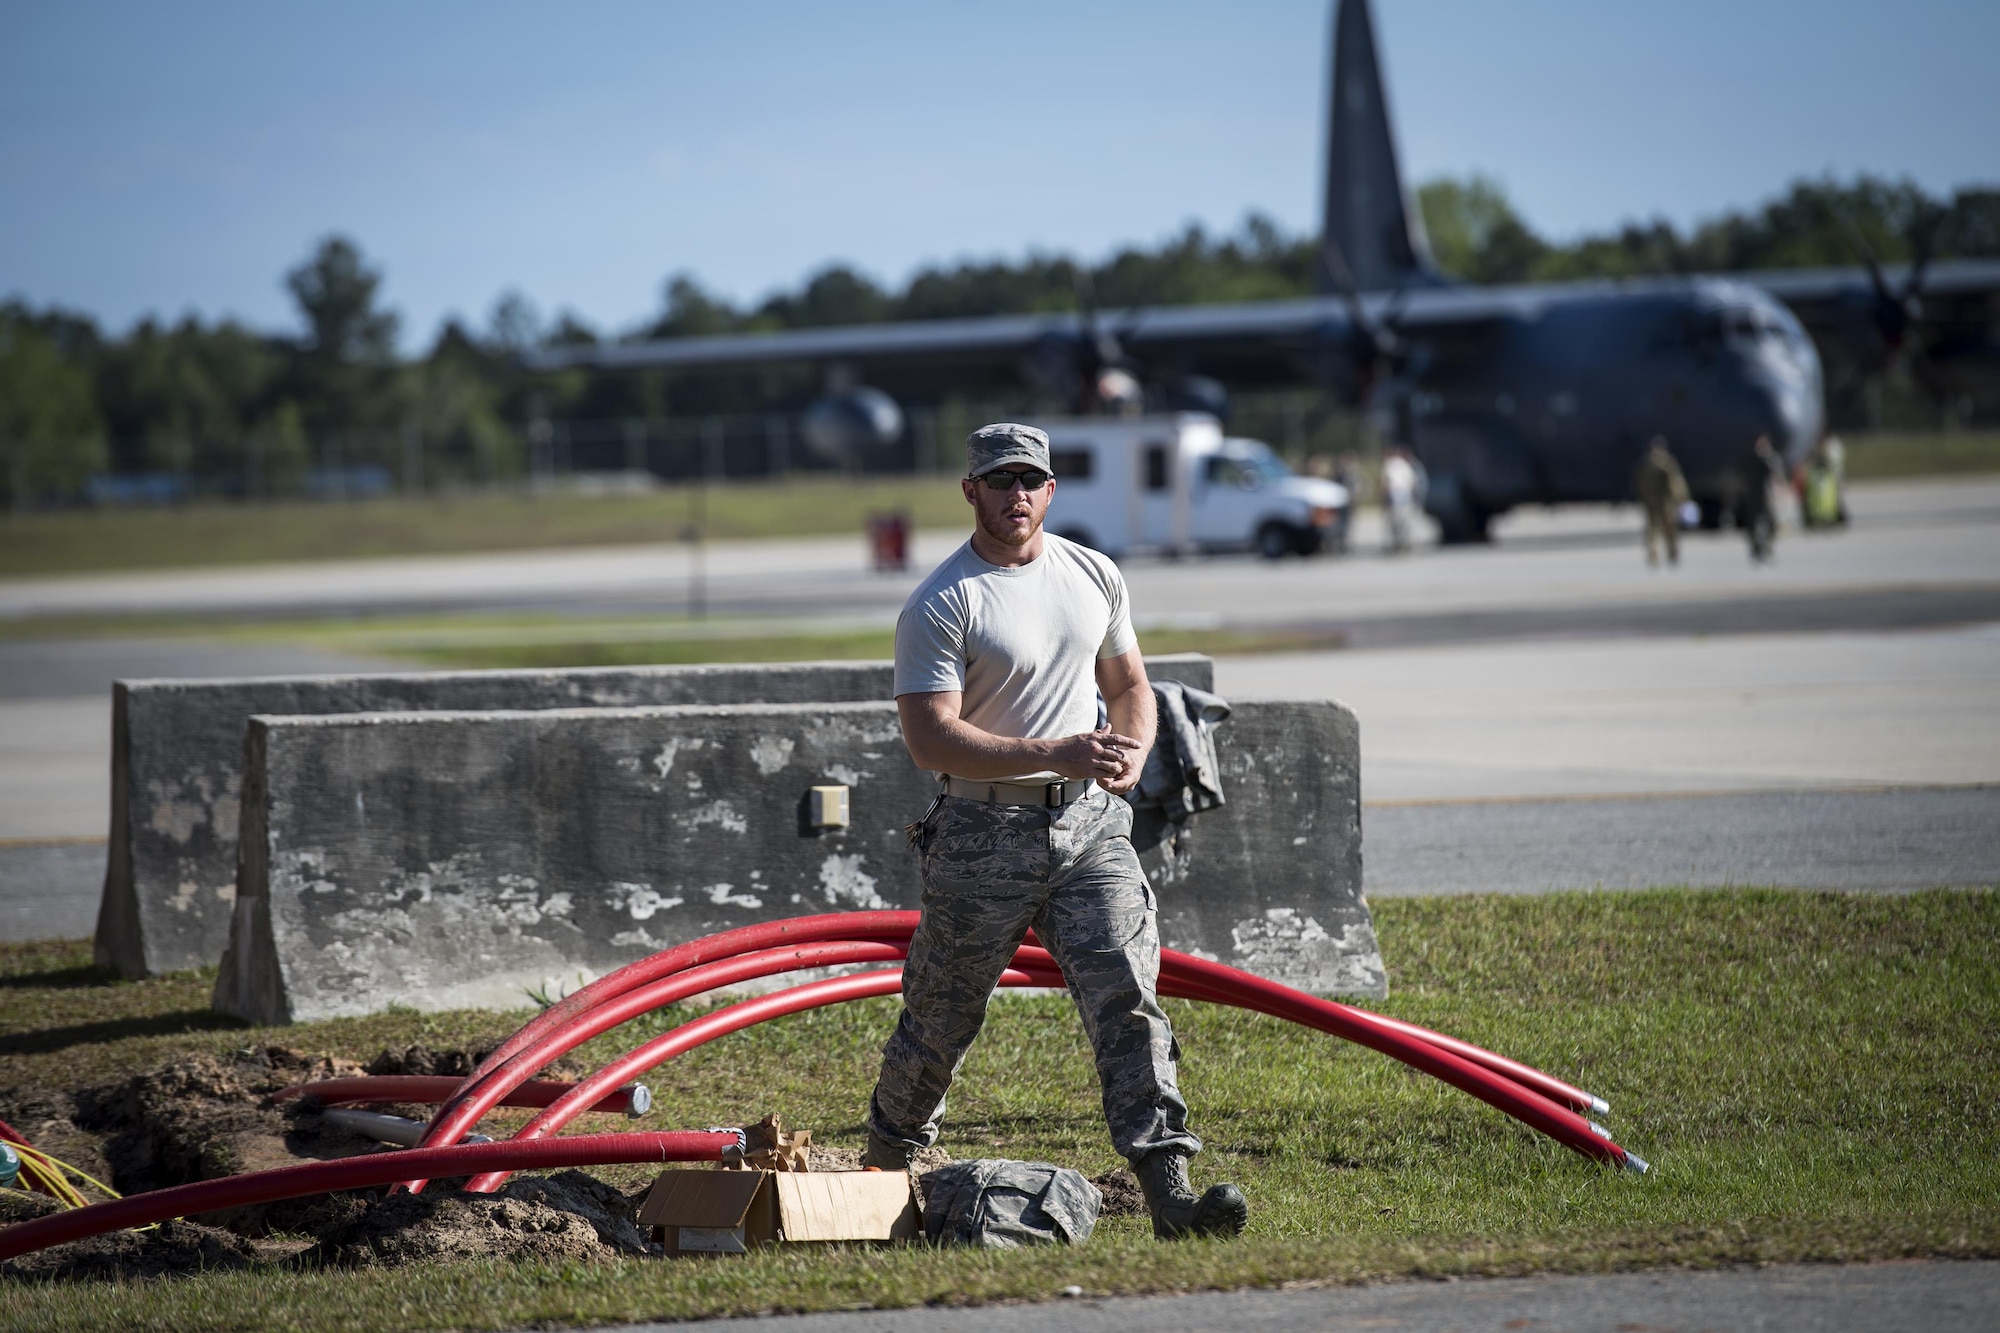 Staff Sgt. Nicholas Worley, 23d Civil Engineer Squadron electrical systems craftsman, walks across the flightline after remarking wires, April 13, 2017, at Moody Air Force Base, Ga. In January 2012, Worley was diagnosed with Chronic Myelogenous Leukemia, an uncommon form of blood-cell cancer that starts in the blood-forming bone marrow cells. He’s currently in remission and goes to the cancer center every three months to ensure his treatment is still working. (U.S. Air Force Photo by Senior Airman Janiqua P. Robinson)